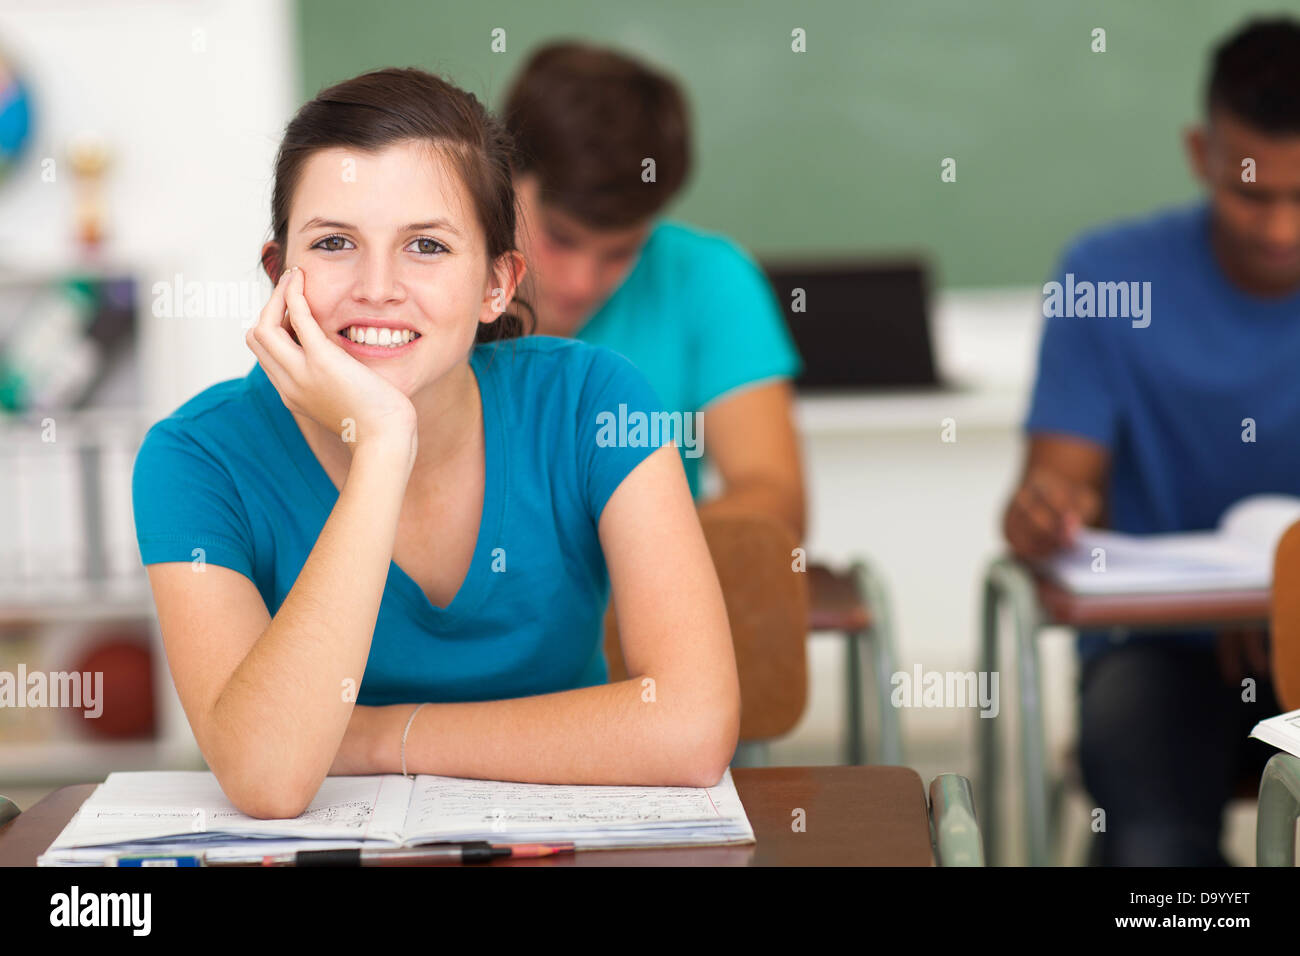 close up portrait of teenage high school girl sitting in classroom with classmates Stock Photo